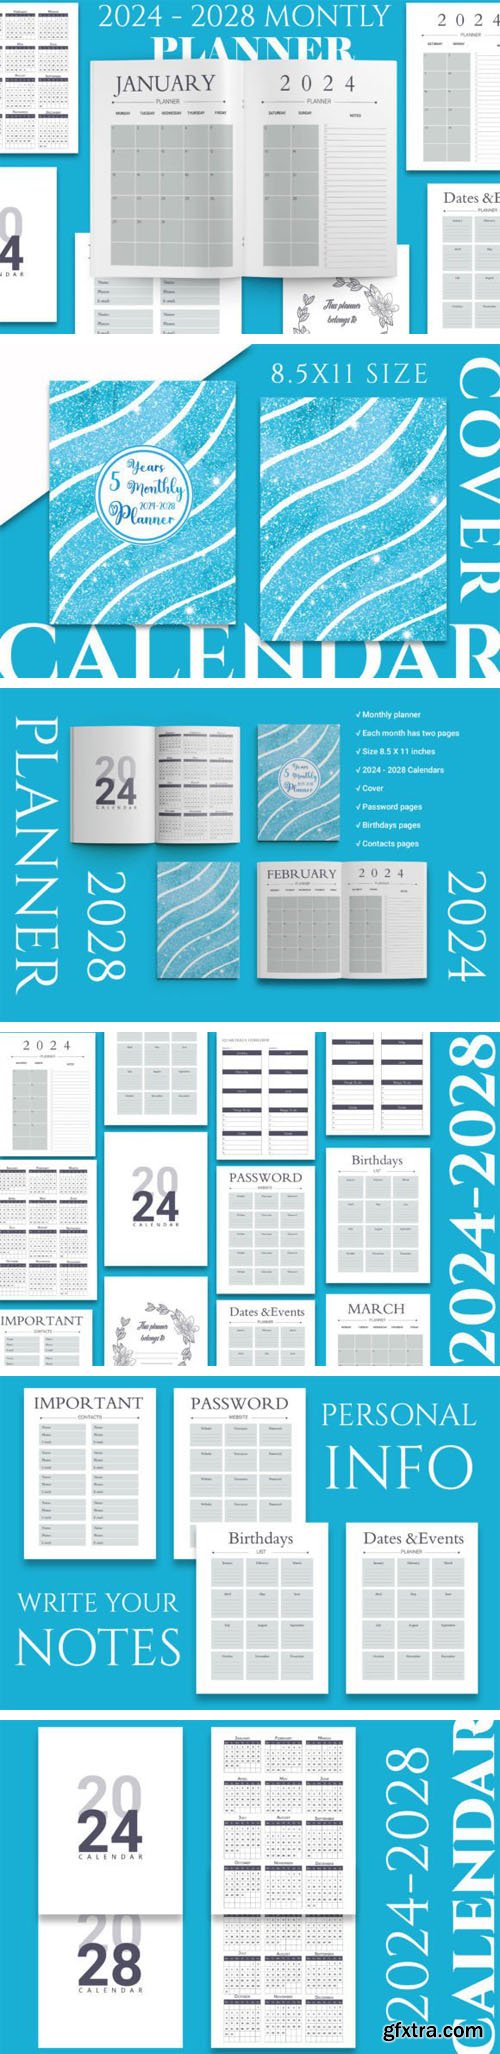 Monthly Planner for Years [2024-2028] - InDesign Templates